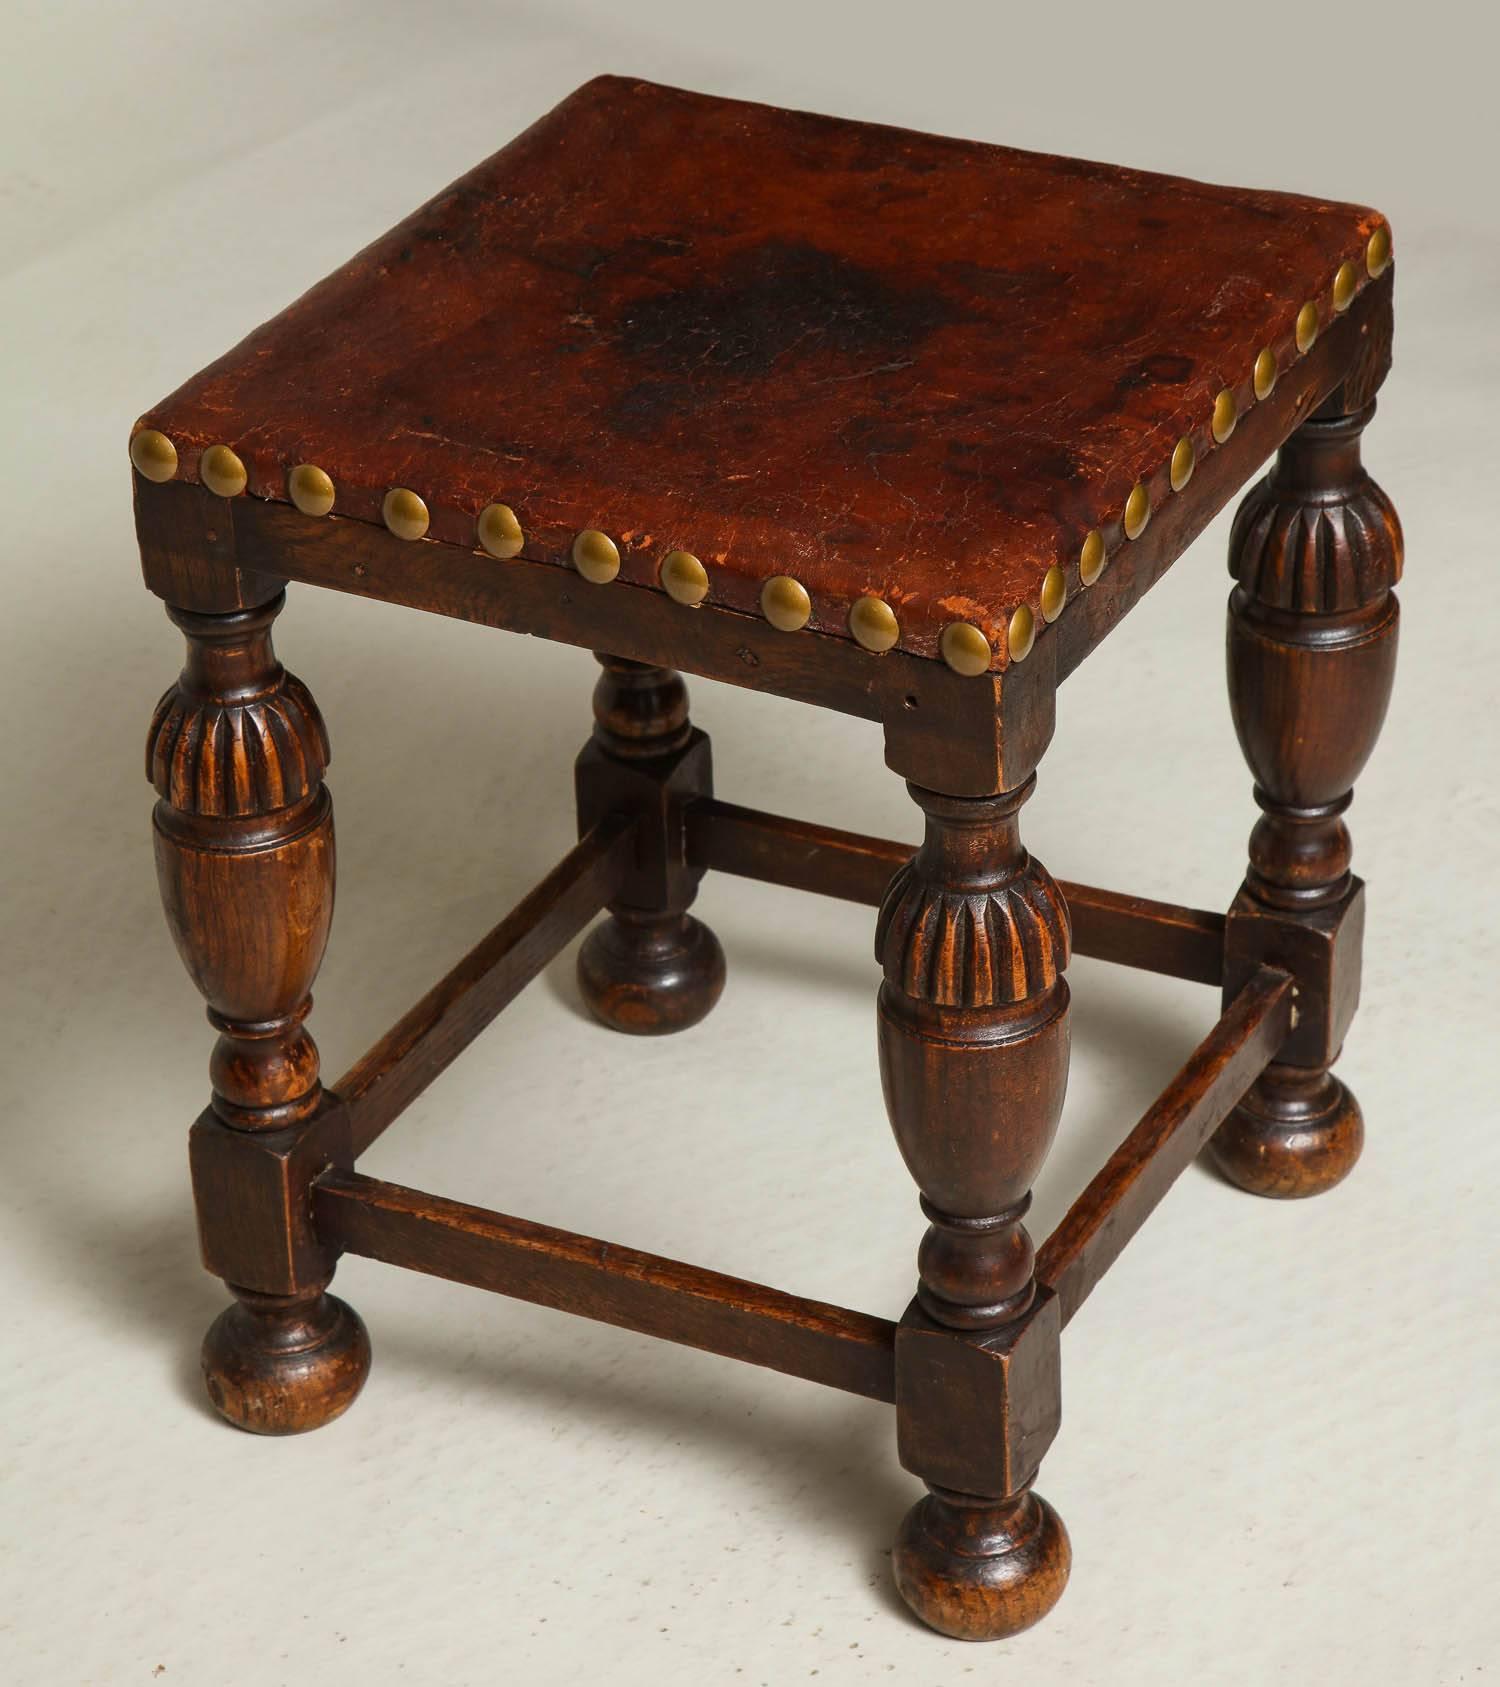 English oak and leather Arts & Crafts stool having thick tanned leather seat with over scale brass studs, over 